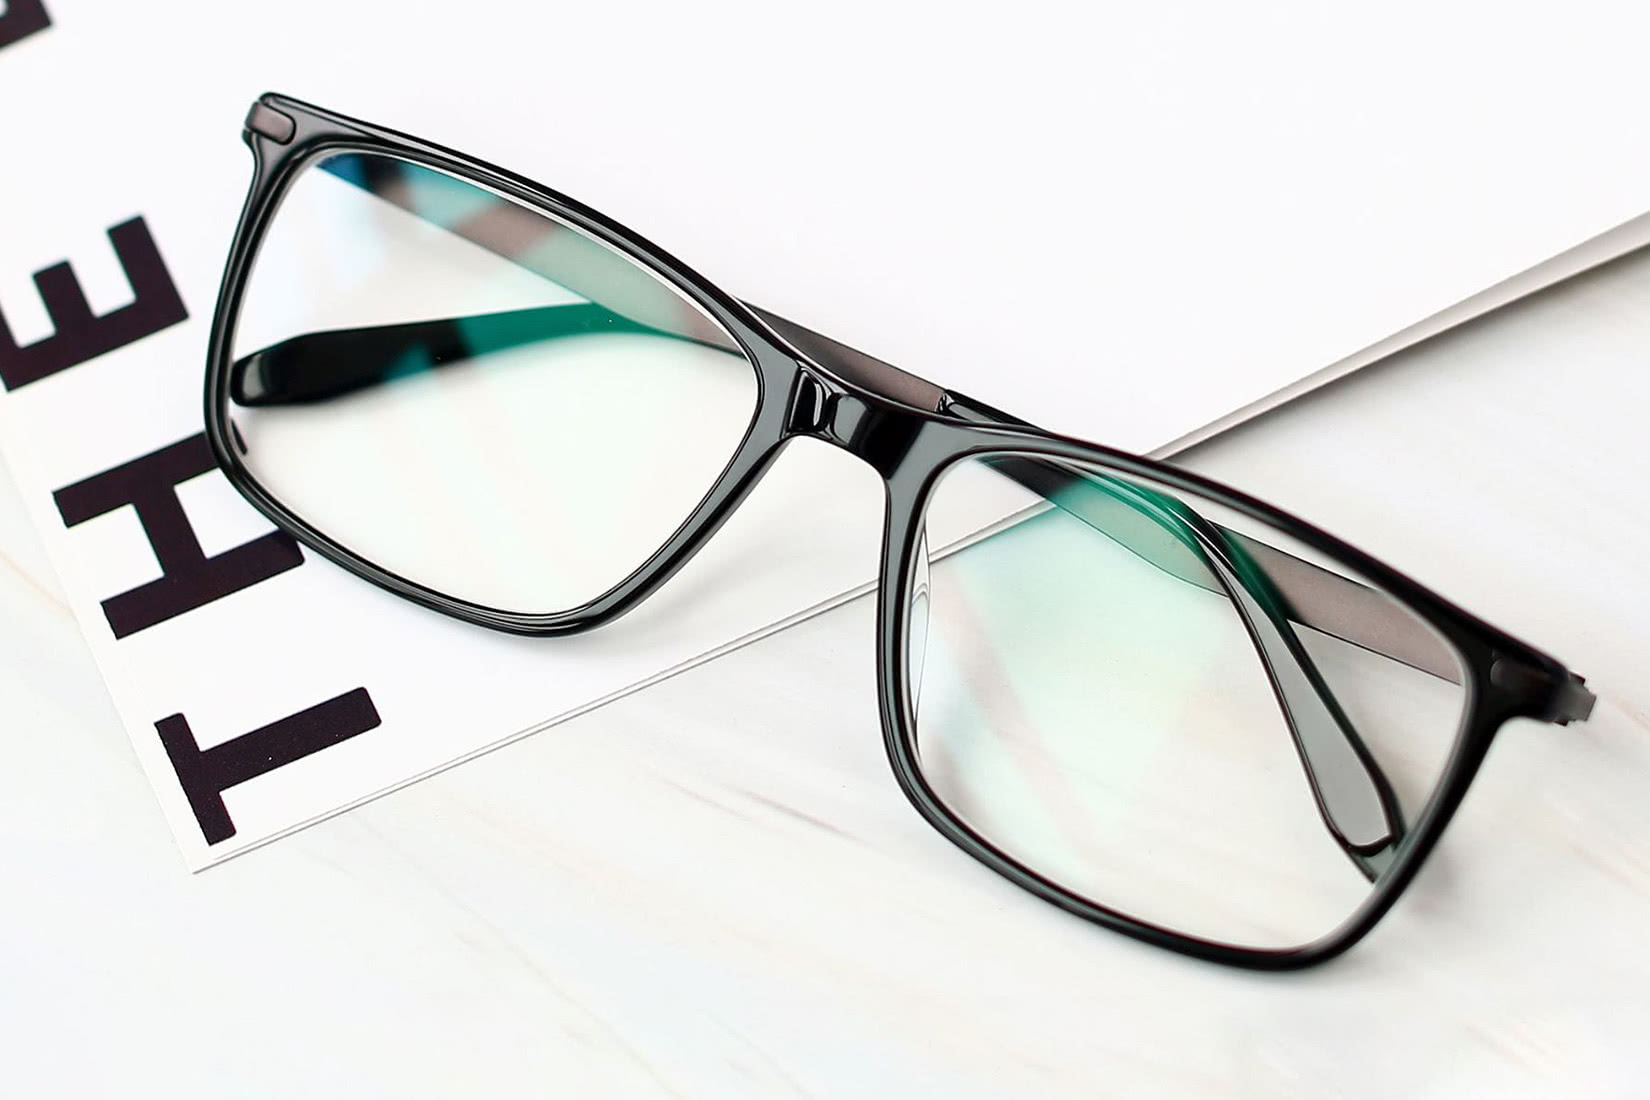 Yesglasses review delivery - Luxe Digital